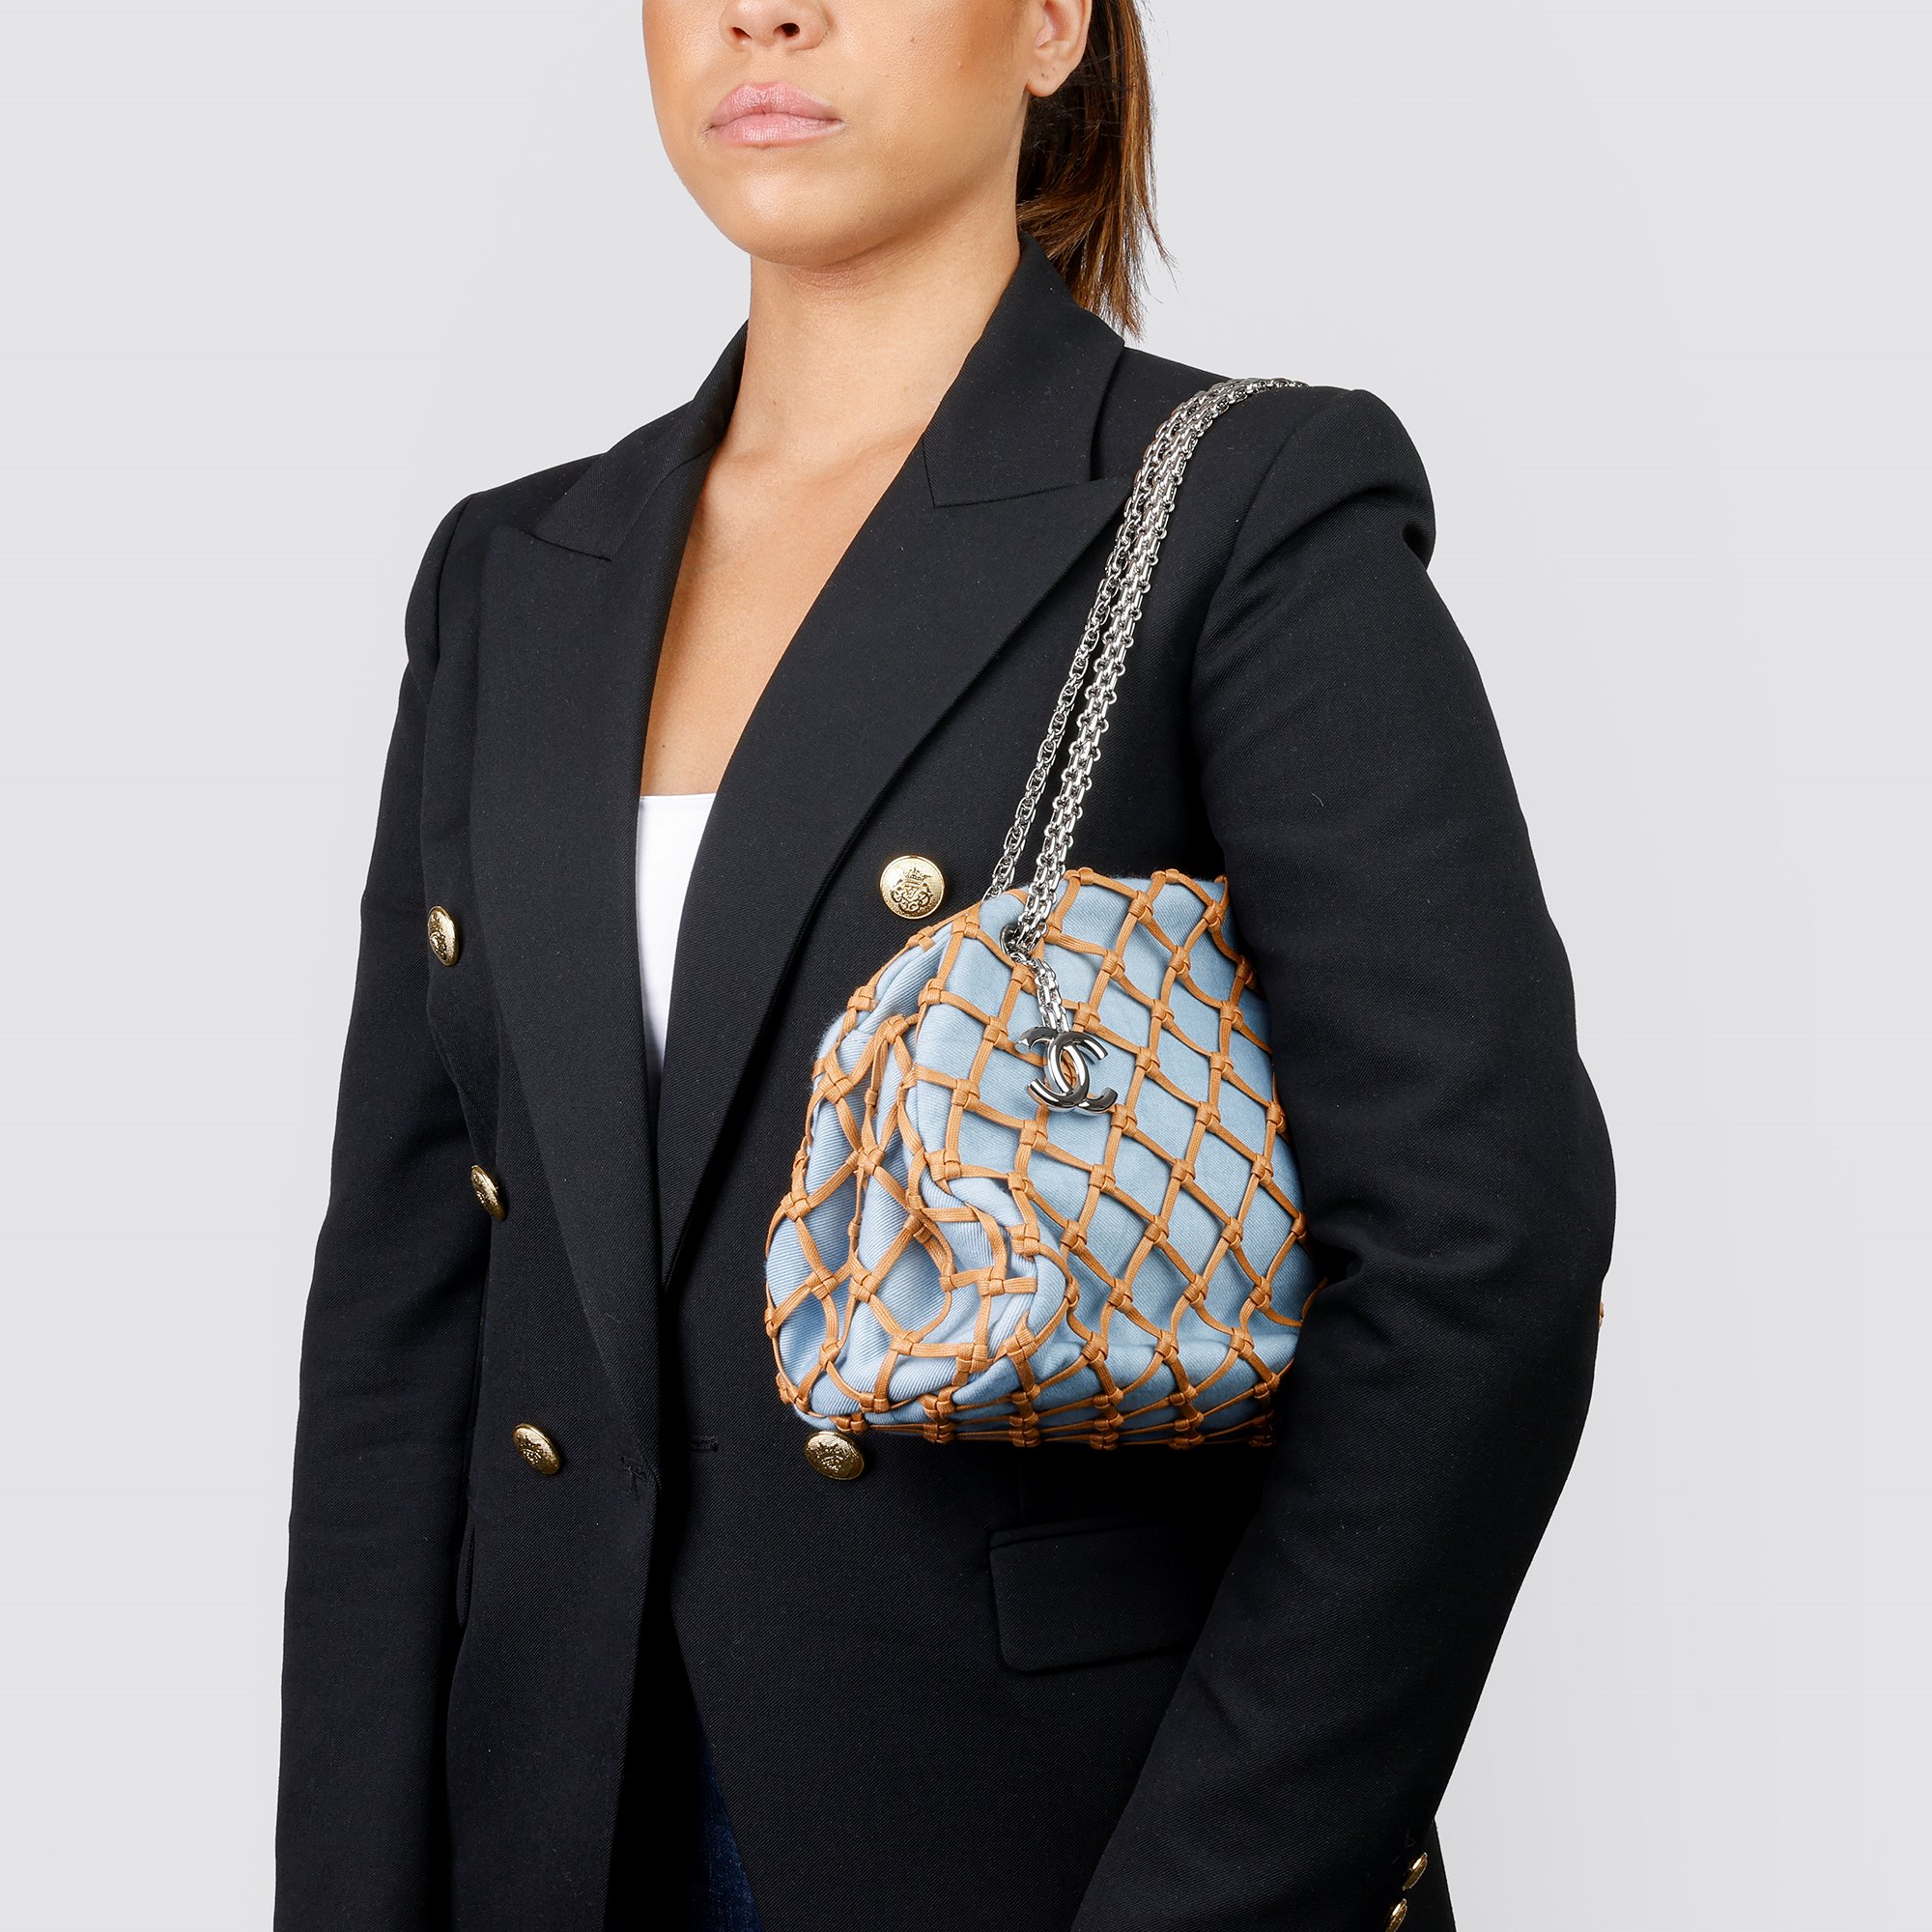 Chanel Light Blue Denim & Brown Woven Rope Canebier Just Mademoiselle Bowling Bag